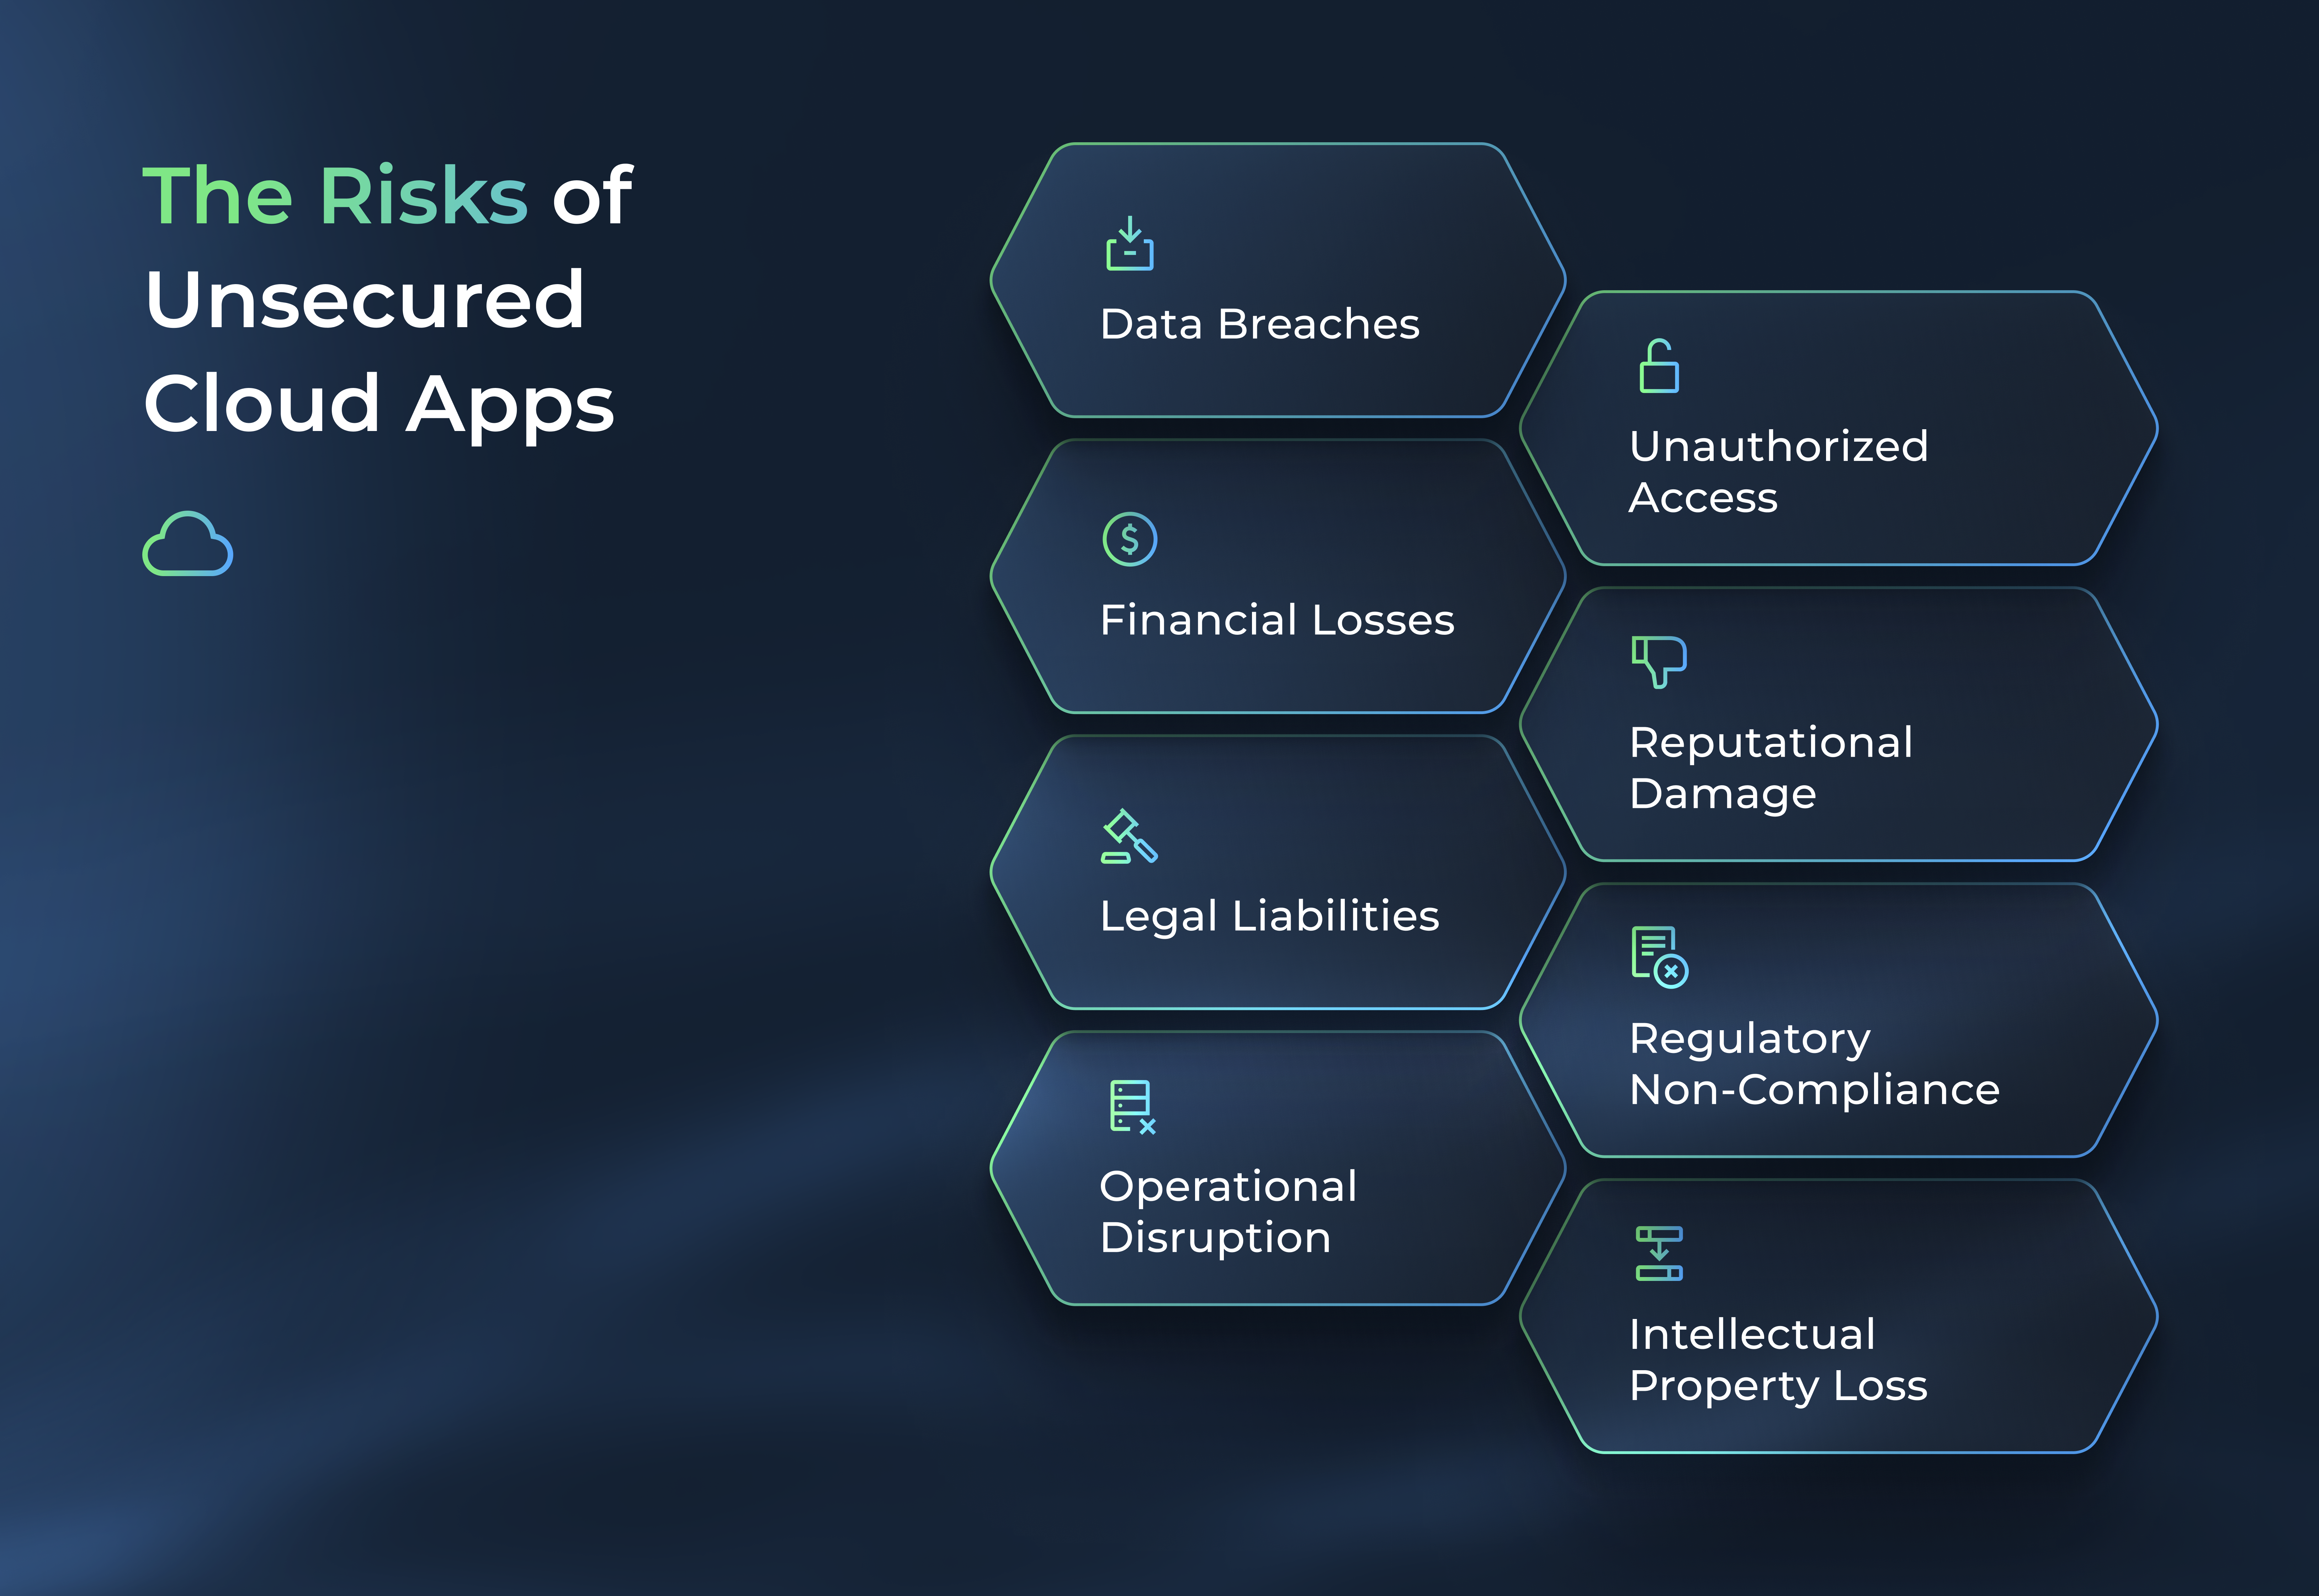 The Risks of Unsecured Cloud Apps
Data Breaches
Unauthorized Access
Financial Losses
Reputational Damage
Legal Liabilities
Regulatory Non-Compliance
Operational Disruption
Intellectual Property Loss
